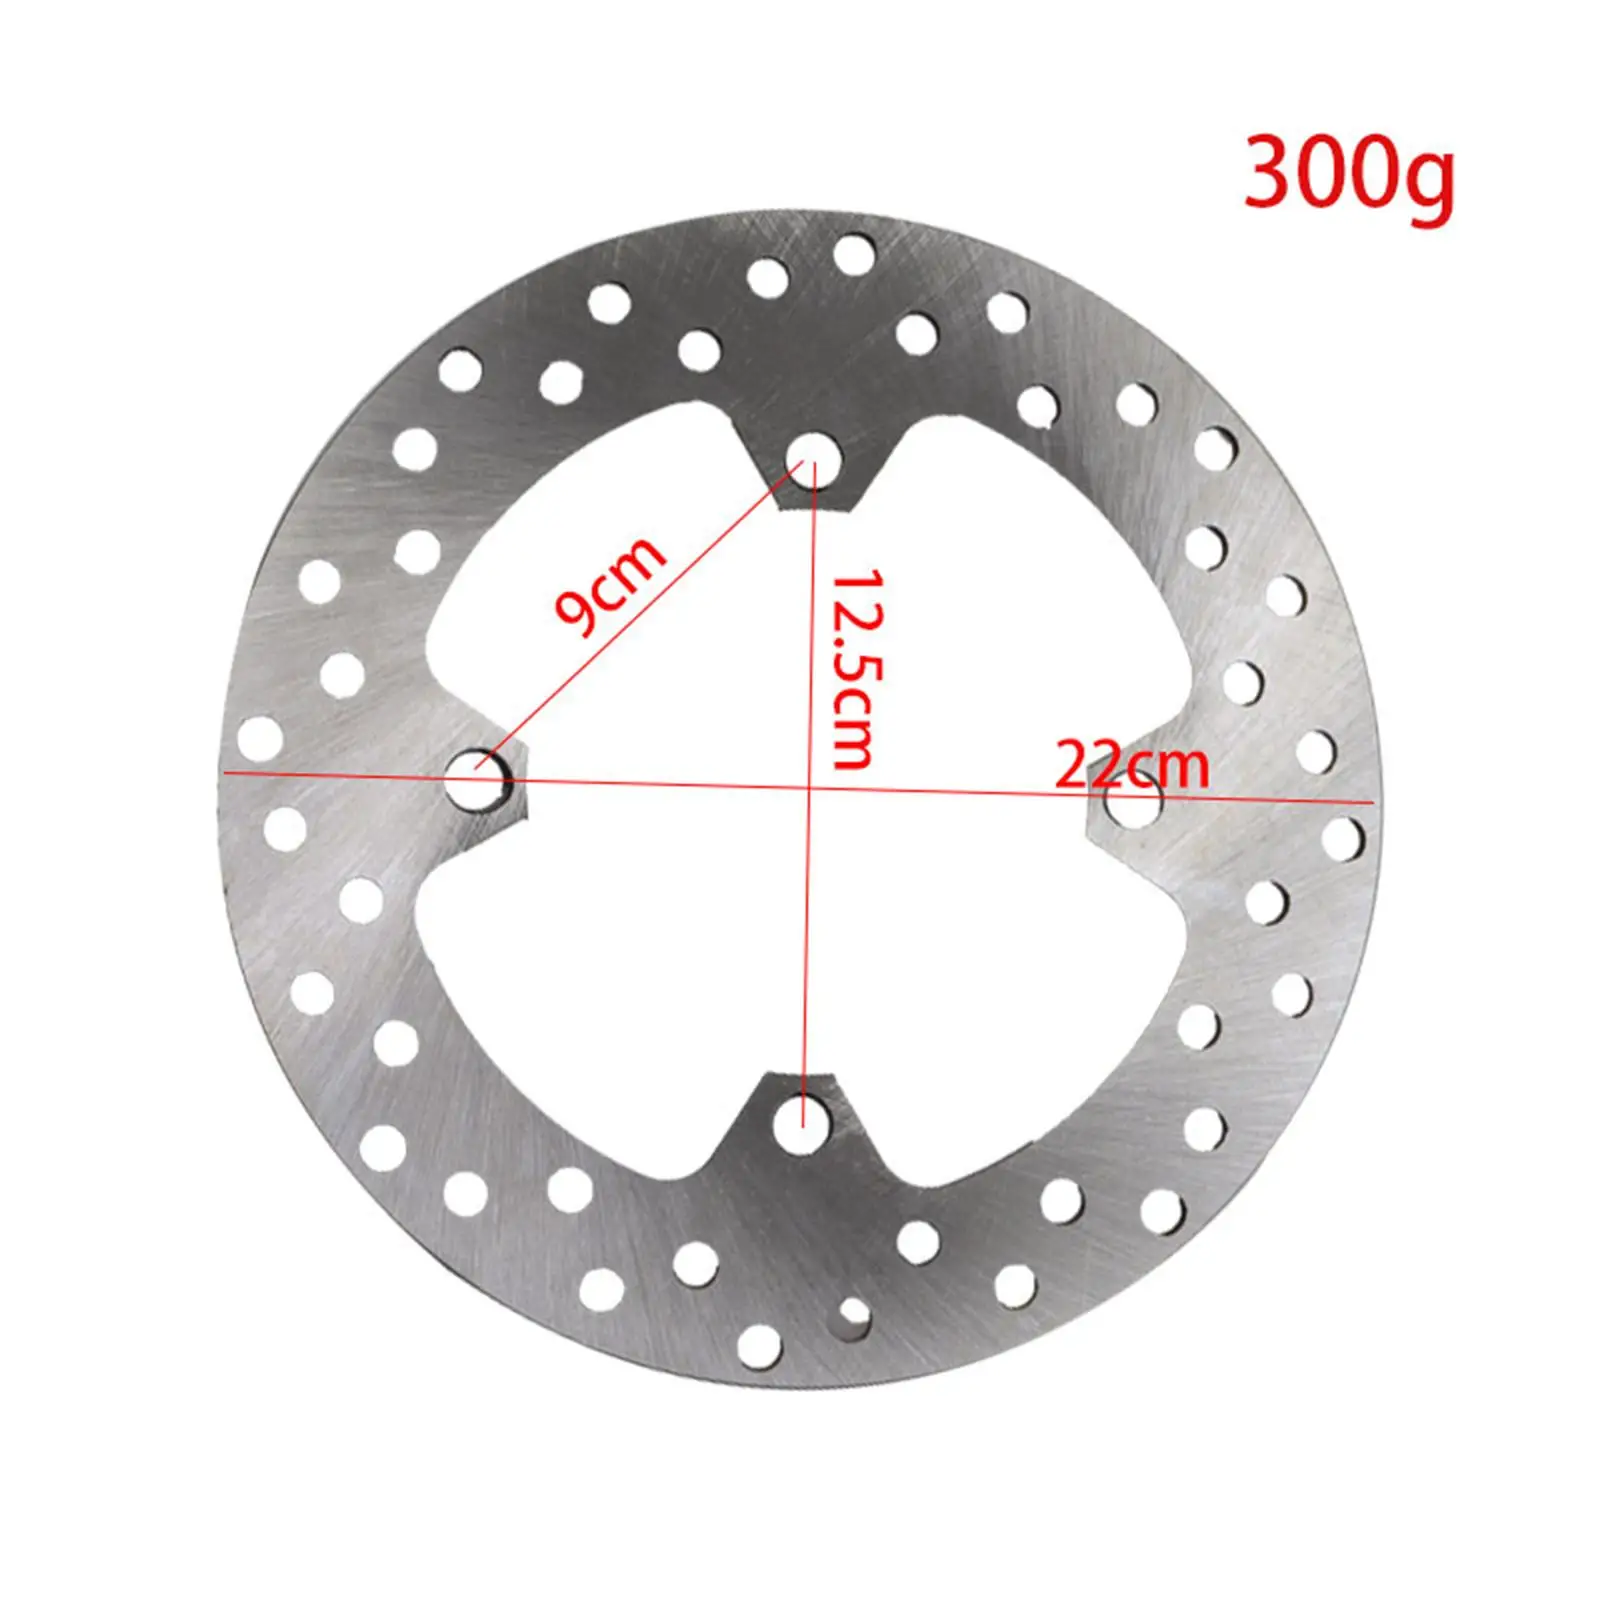 Motorcycle Brake Disc Rotor Sturdy Direct Replaces Accessories High Performance for Honda TRX400EX XR400 XR600R CBR125R